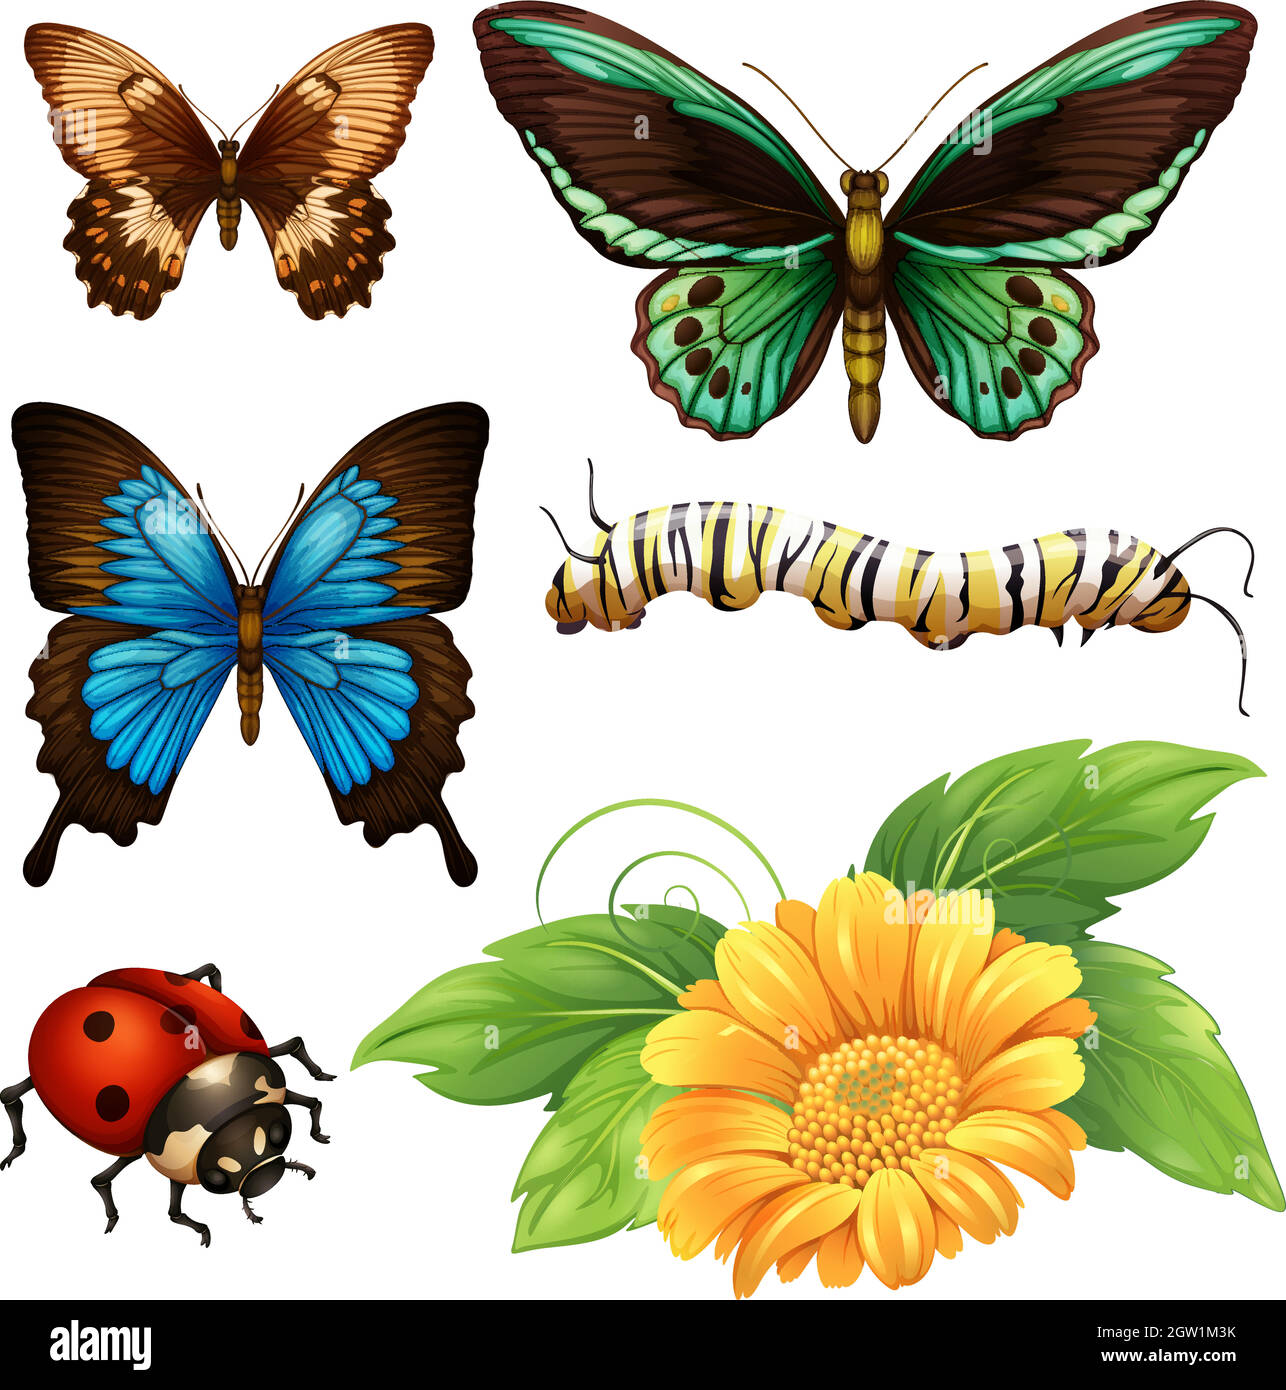 Different kind of butterflies and bugs Stock Vector